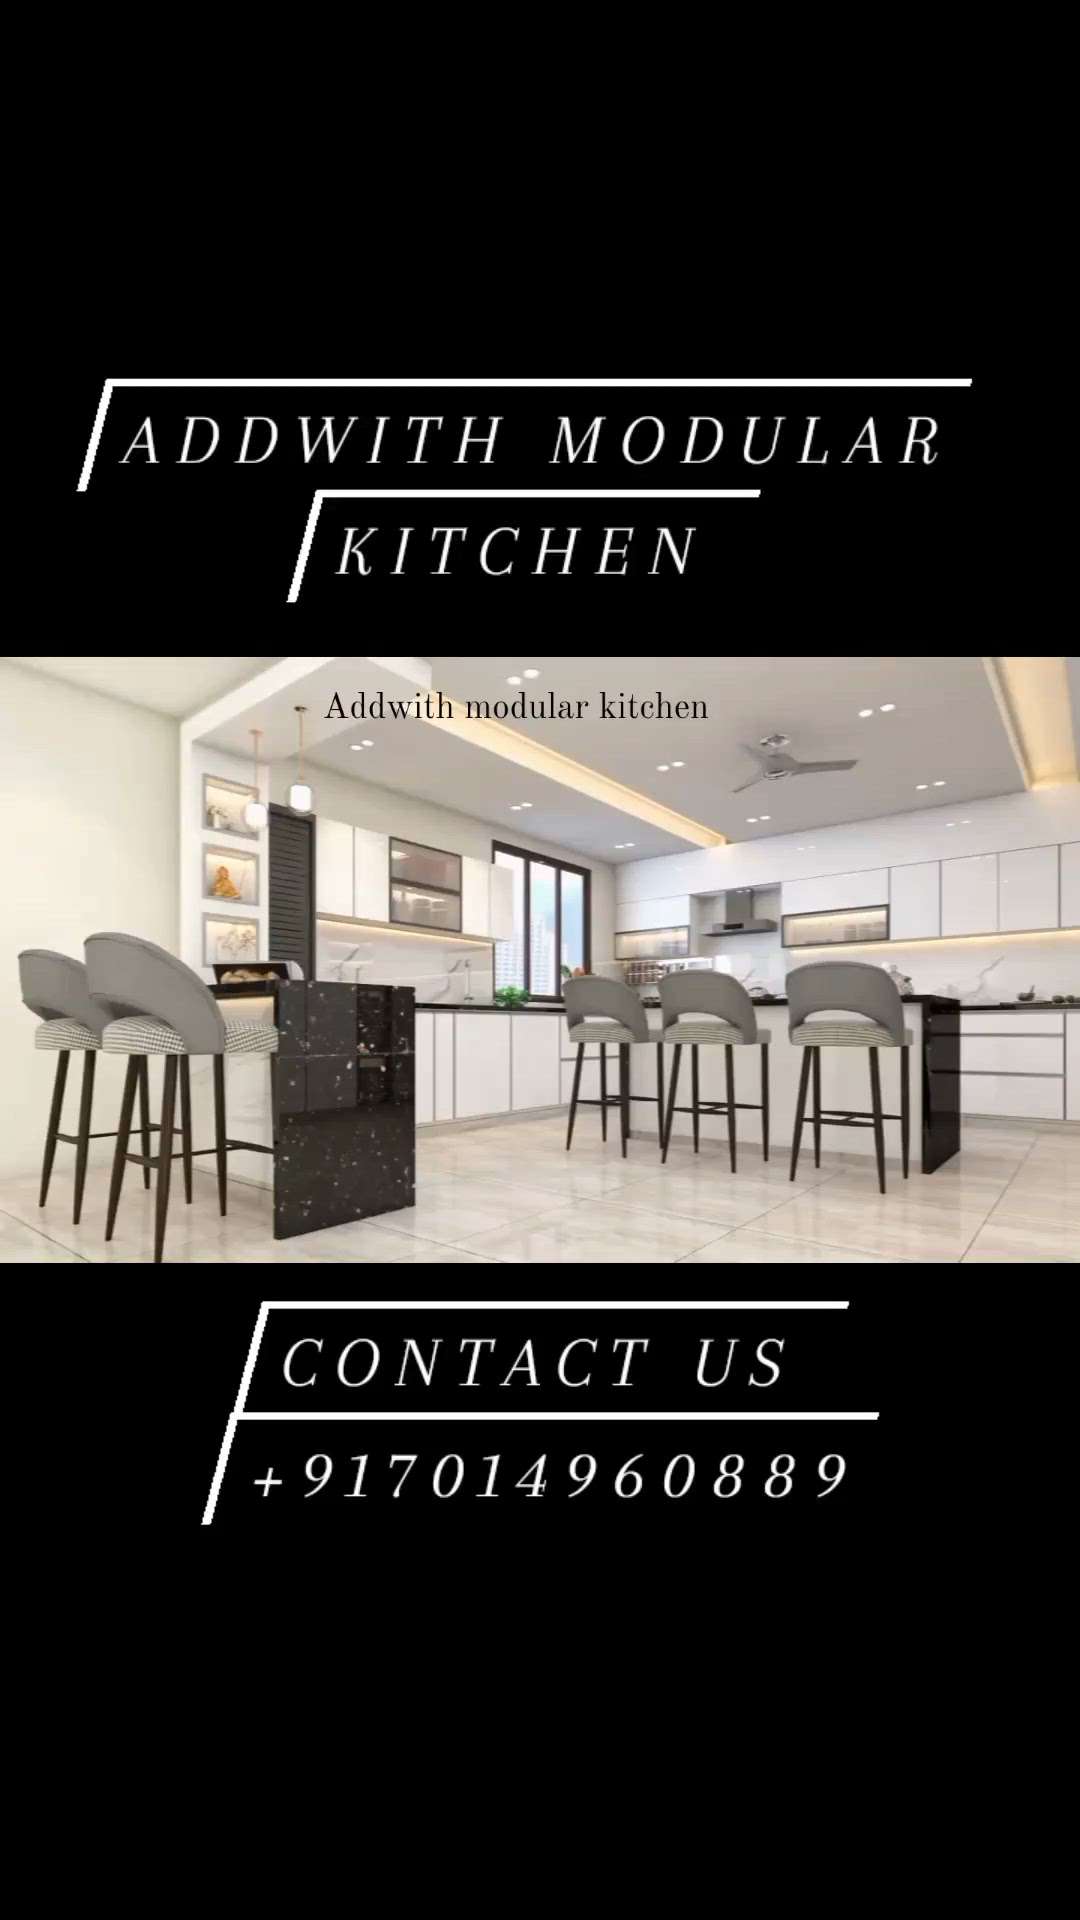 2mm White colour polyglass Modular kitchen
Dm for price 
#Addwith (The Art of Kitchen) deals with all kinds of Modular kitchen & Furniture, Doors, Windows - Get Beautiful designs of Home Furniture, Office Furniture, Sofa Set, Bed, Chairs, Dining Table, Almirahs, Lockers, Cupboards, Mattress, (All Brands) modular kitchen furniture and Interior Decorator at very Competitive prices with Best Quality.
Note - Delivery facilities are also available 
DM me if you want to design your Kitchen & home
wa.me/+917014960889 
#modularkitchen #interiordesign #kitchen #kitchendesign #homedecor  #Addwith #interior #interiordesigner #kitchencabinets #furniture #modularhomekitchen  #design  #modular #modularkitchens #cabinets #decor #interiors #homedesign #modularfurniture #ModularKitcheninJaipur #furnituredesign #homeinterior #kitchenremodel #kitchenideas  #NewAatishMarket #modulardesign #modularkitchenideas #modularkitcheninjaipur #homedecor #modularhomekitchen